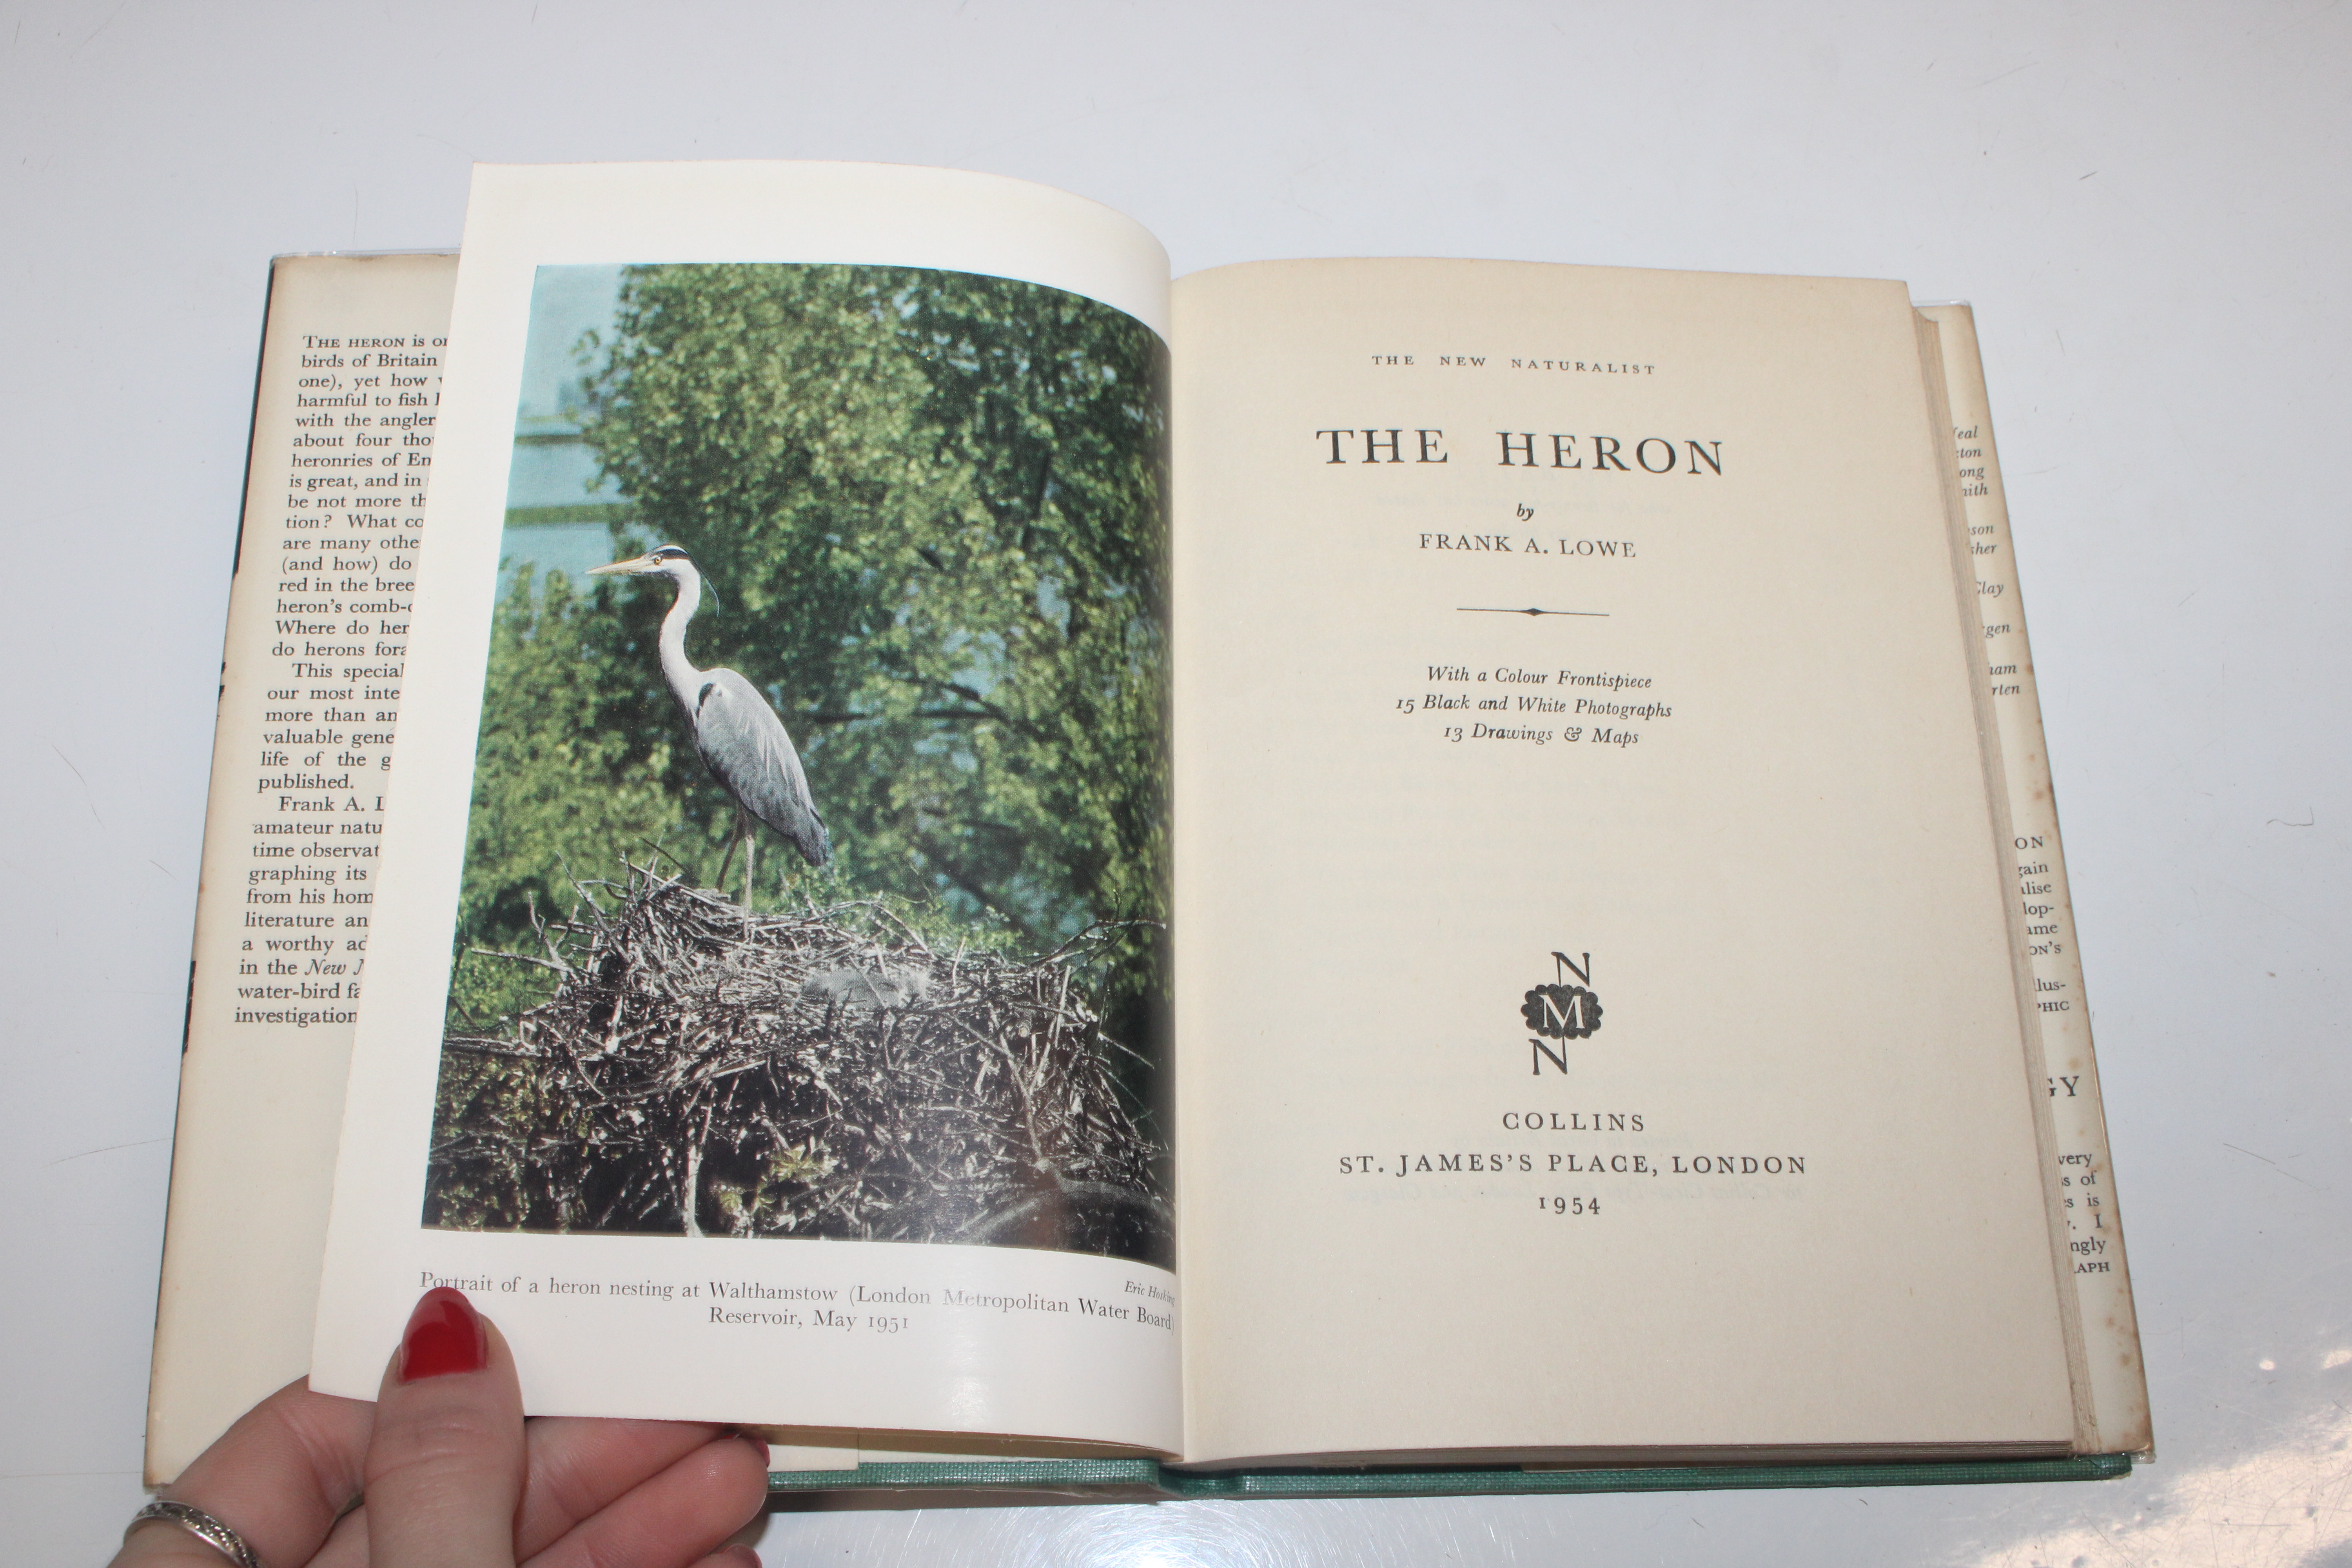 The New Naturalist "The Heron" By Frank A. Lowe, f - Image 5 of 6